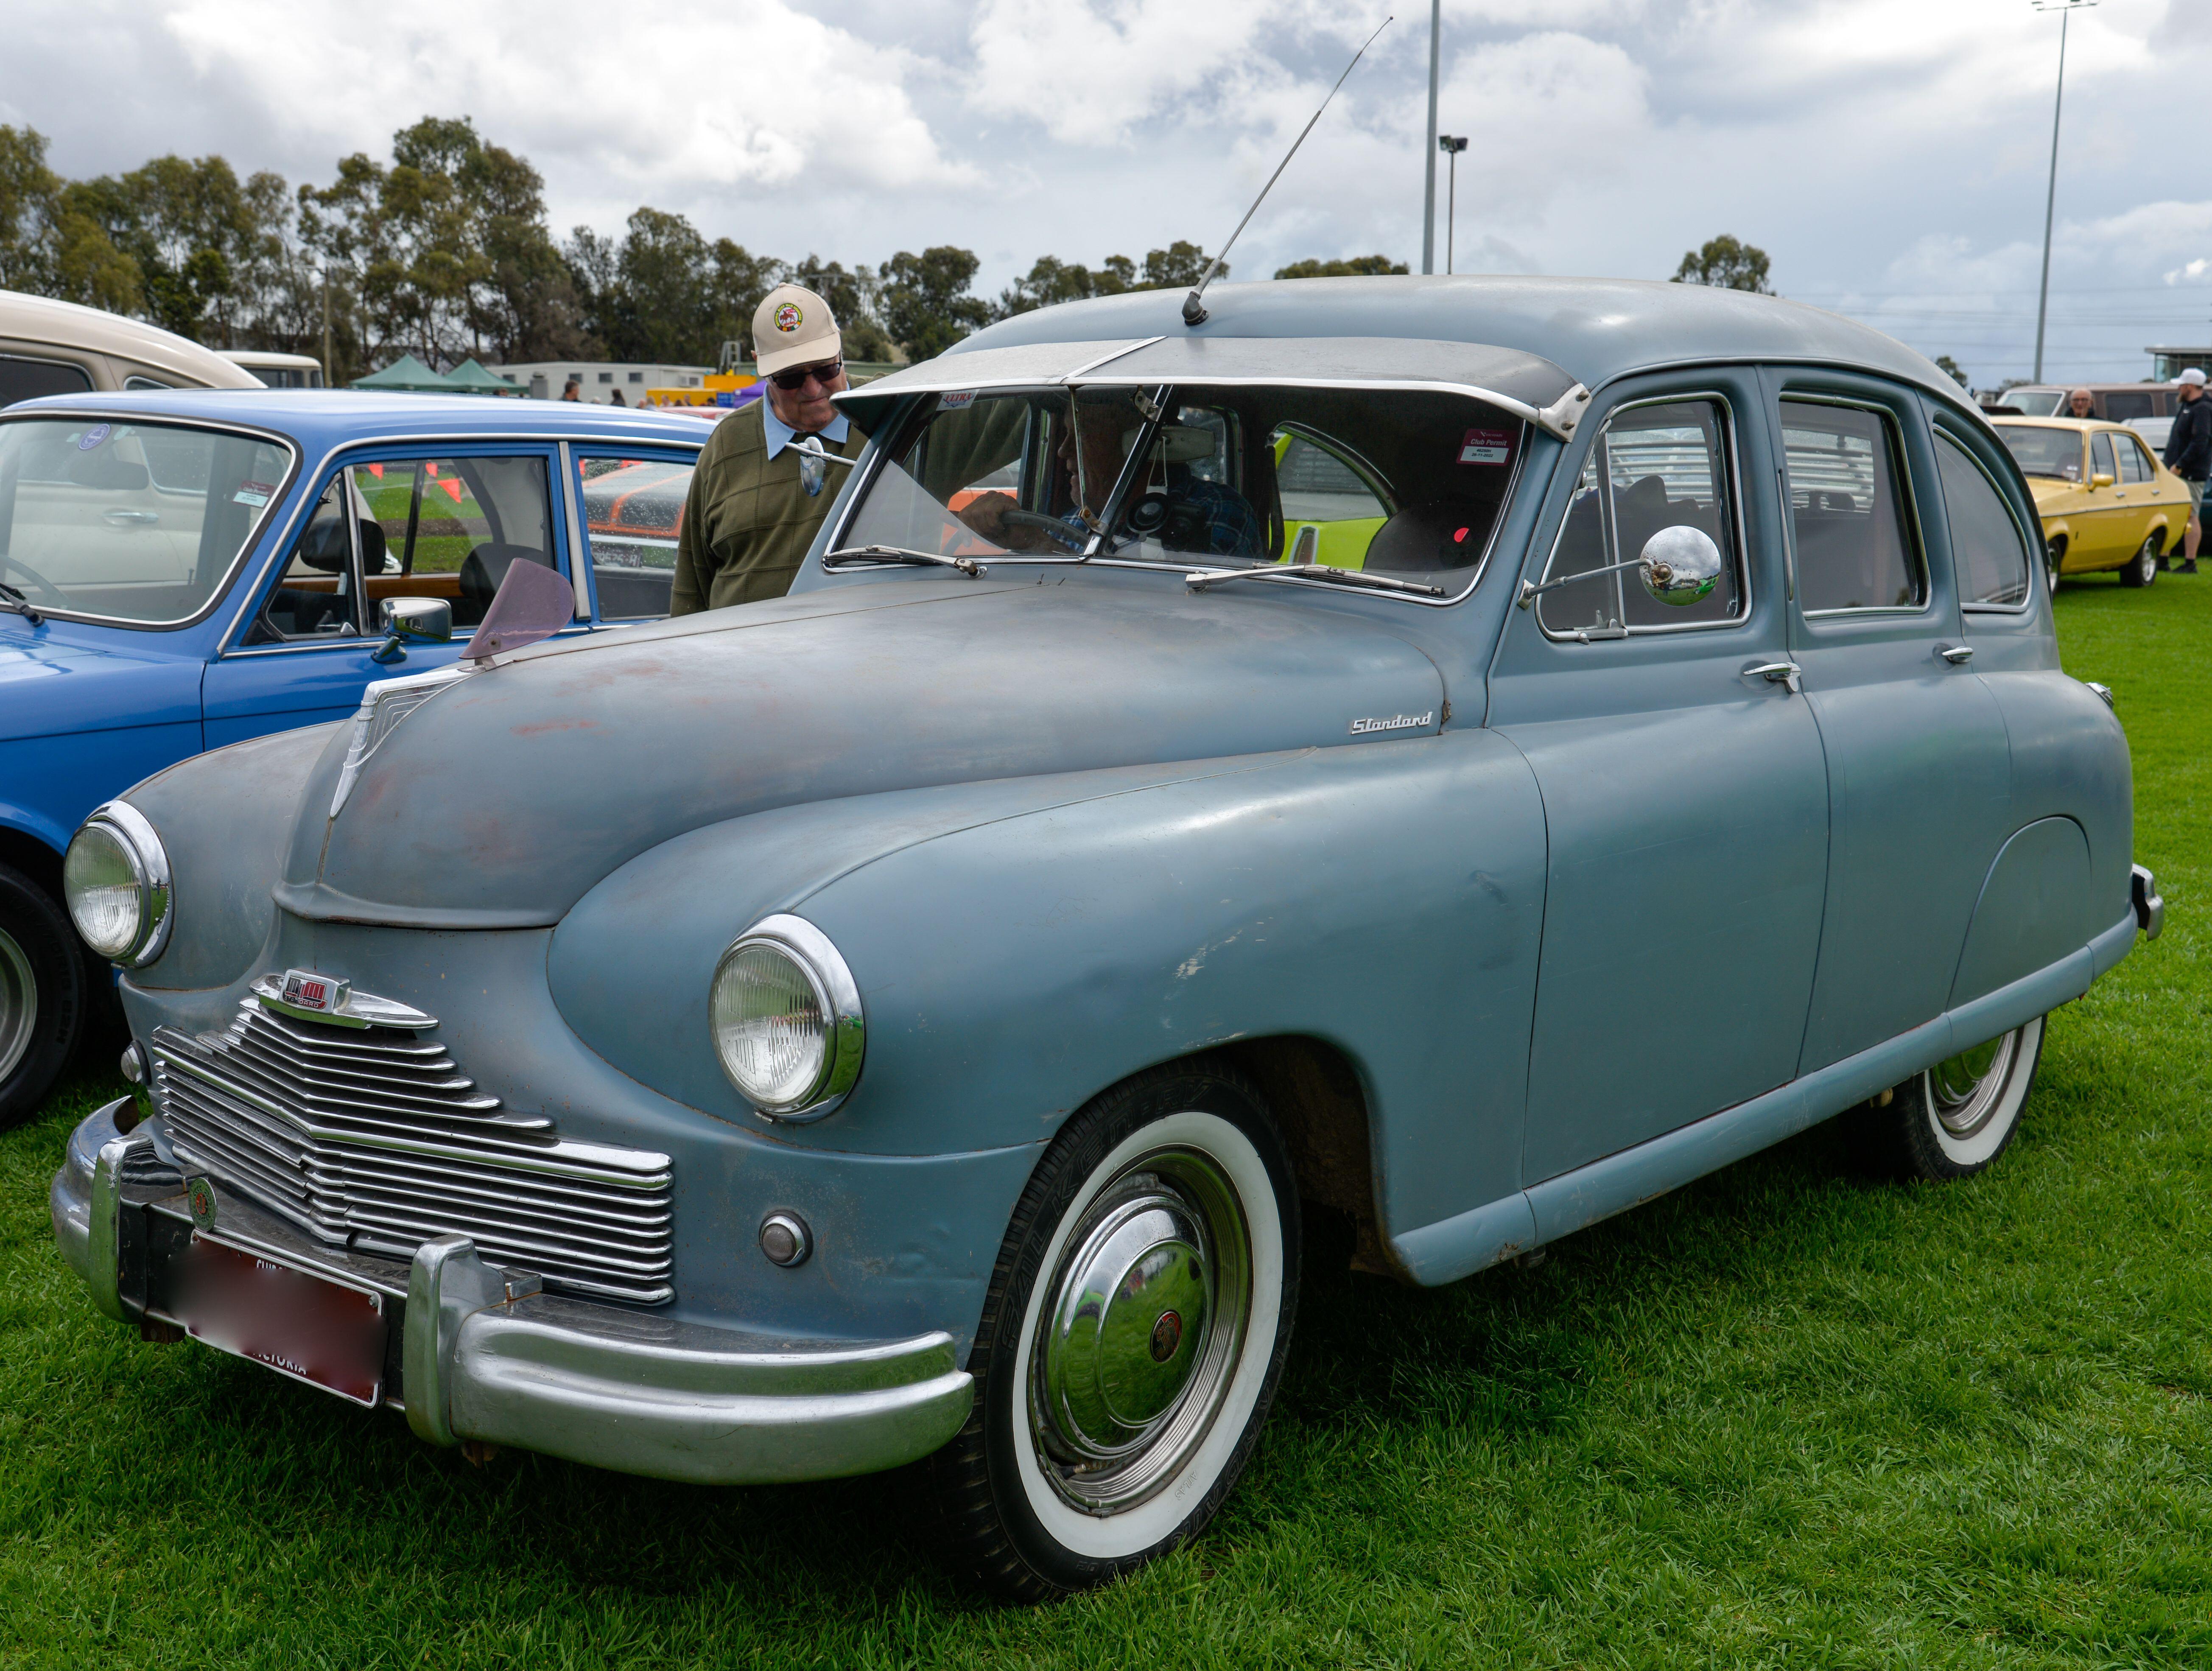 His first car was a Standard Vanguard (stock image)